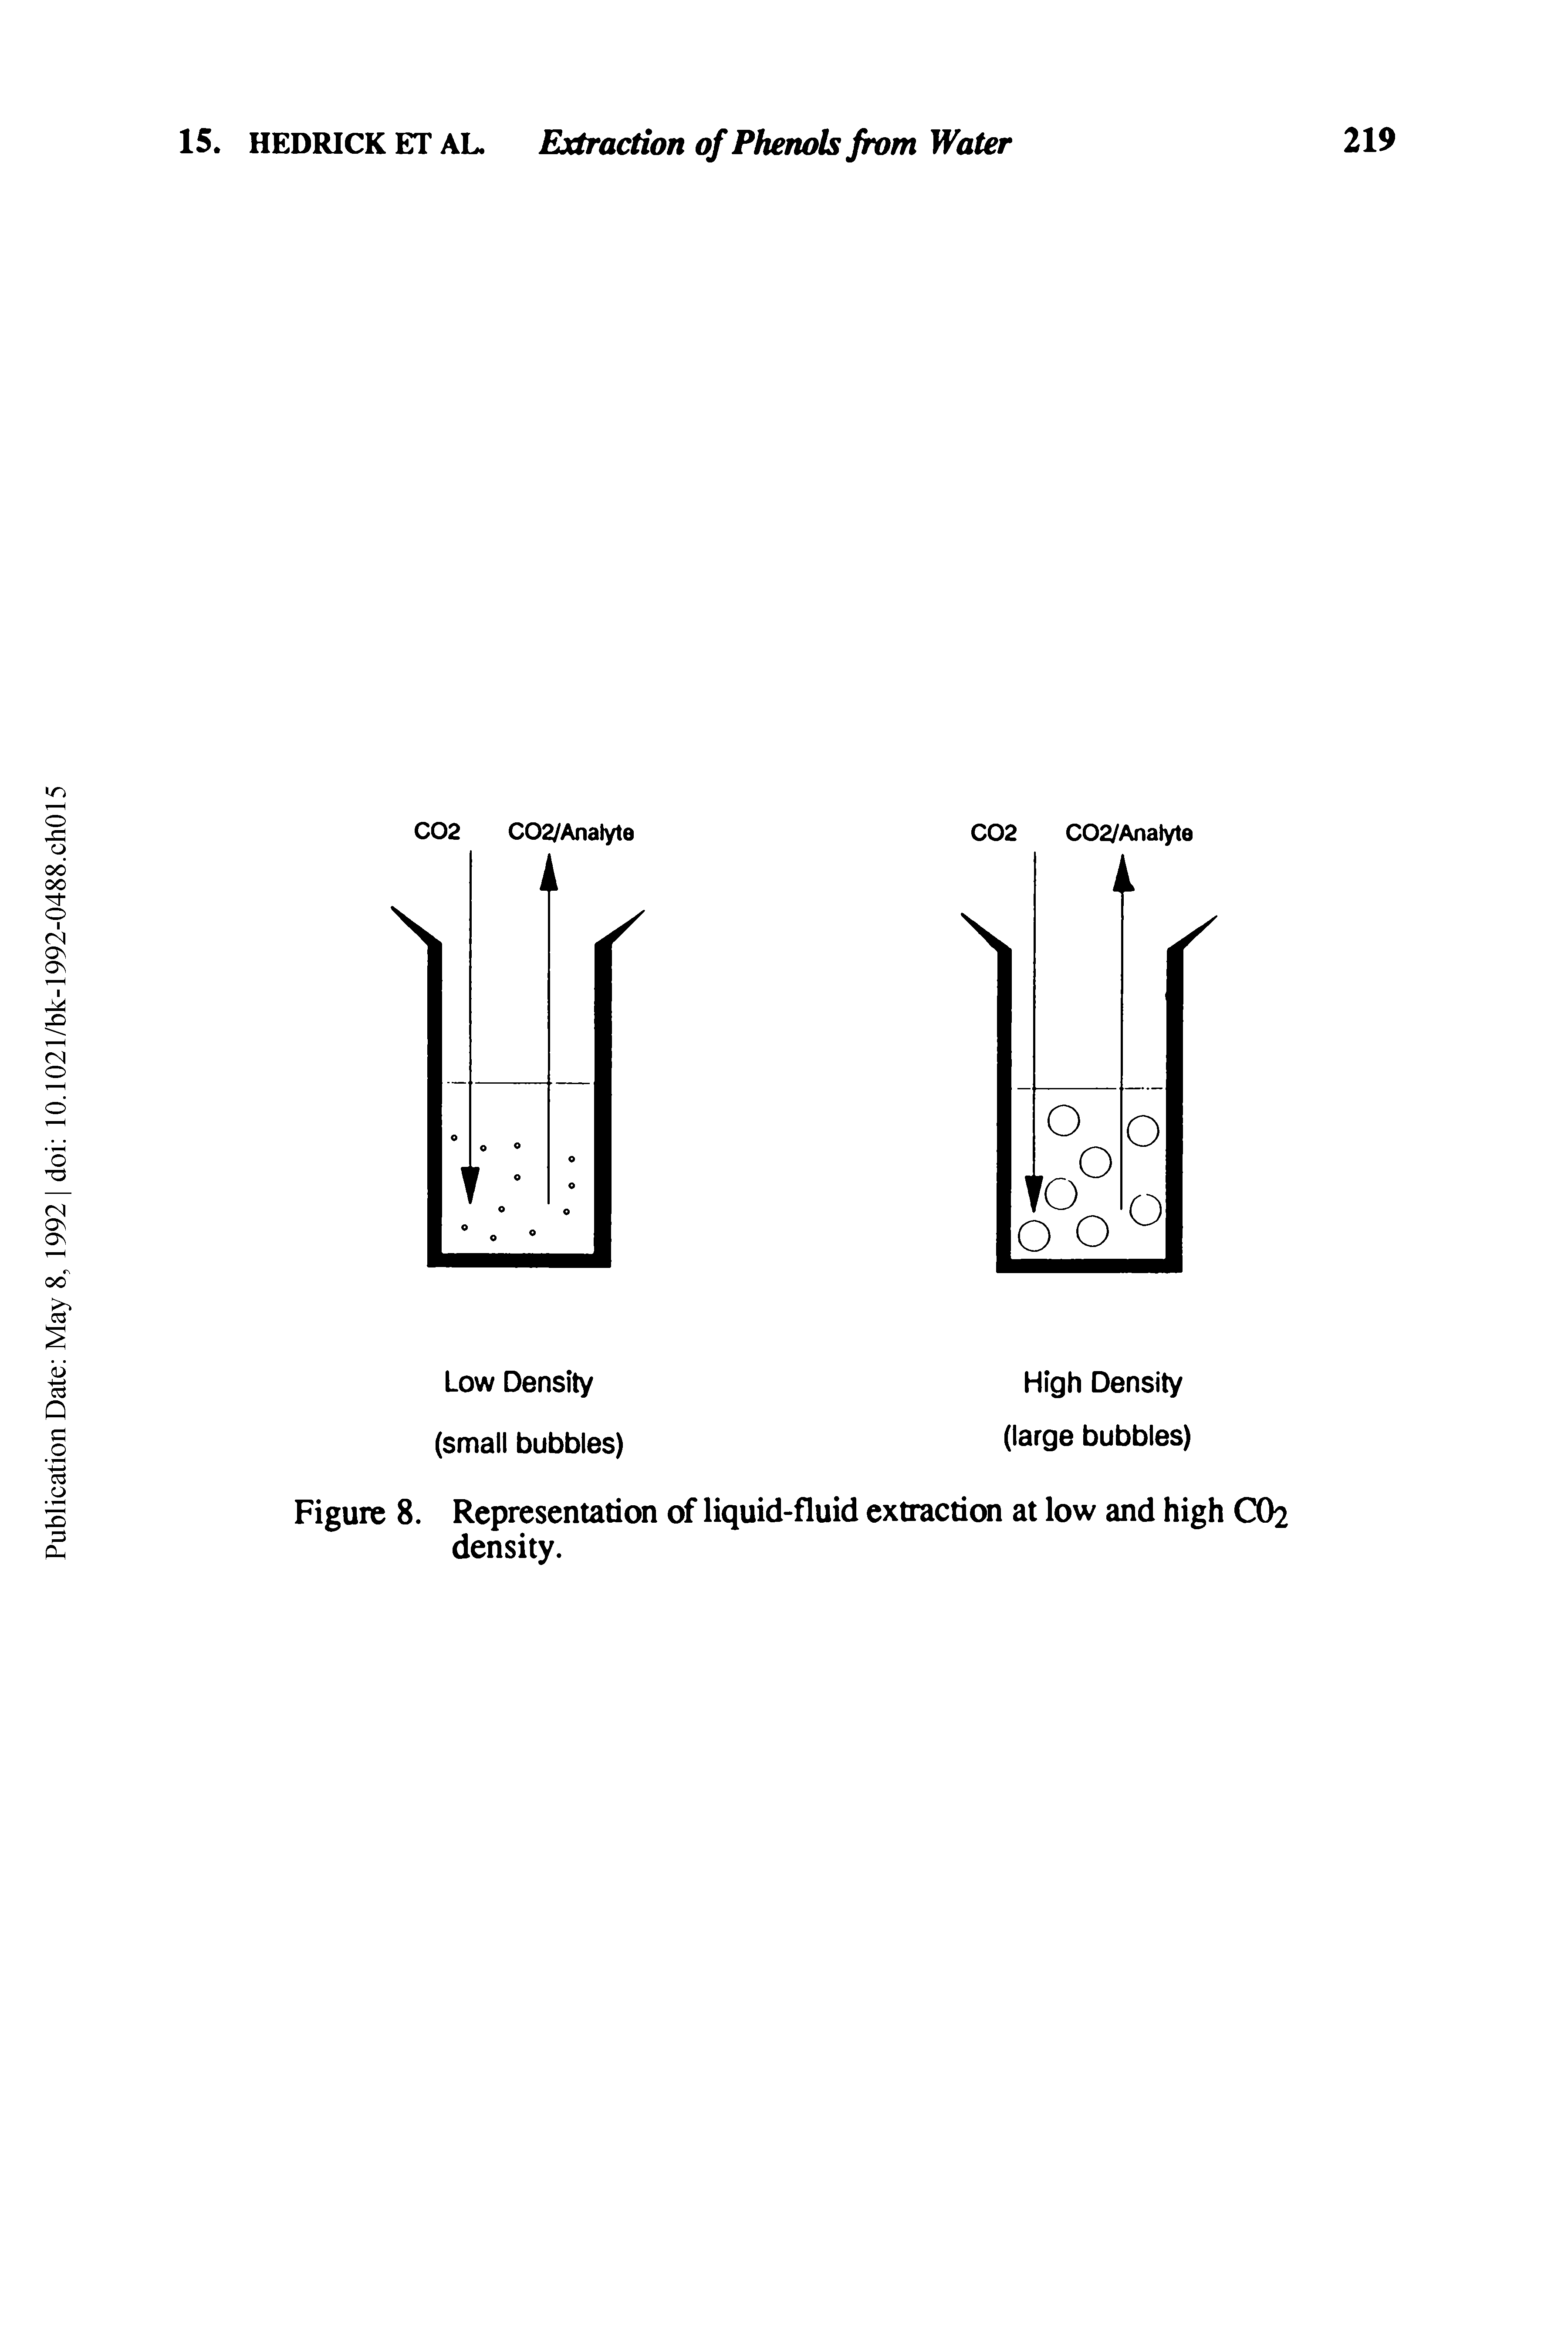 Figure 8. Representation of liquid-fluid extraction at low and high CO2 density.